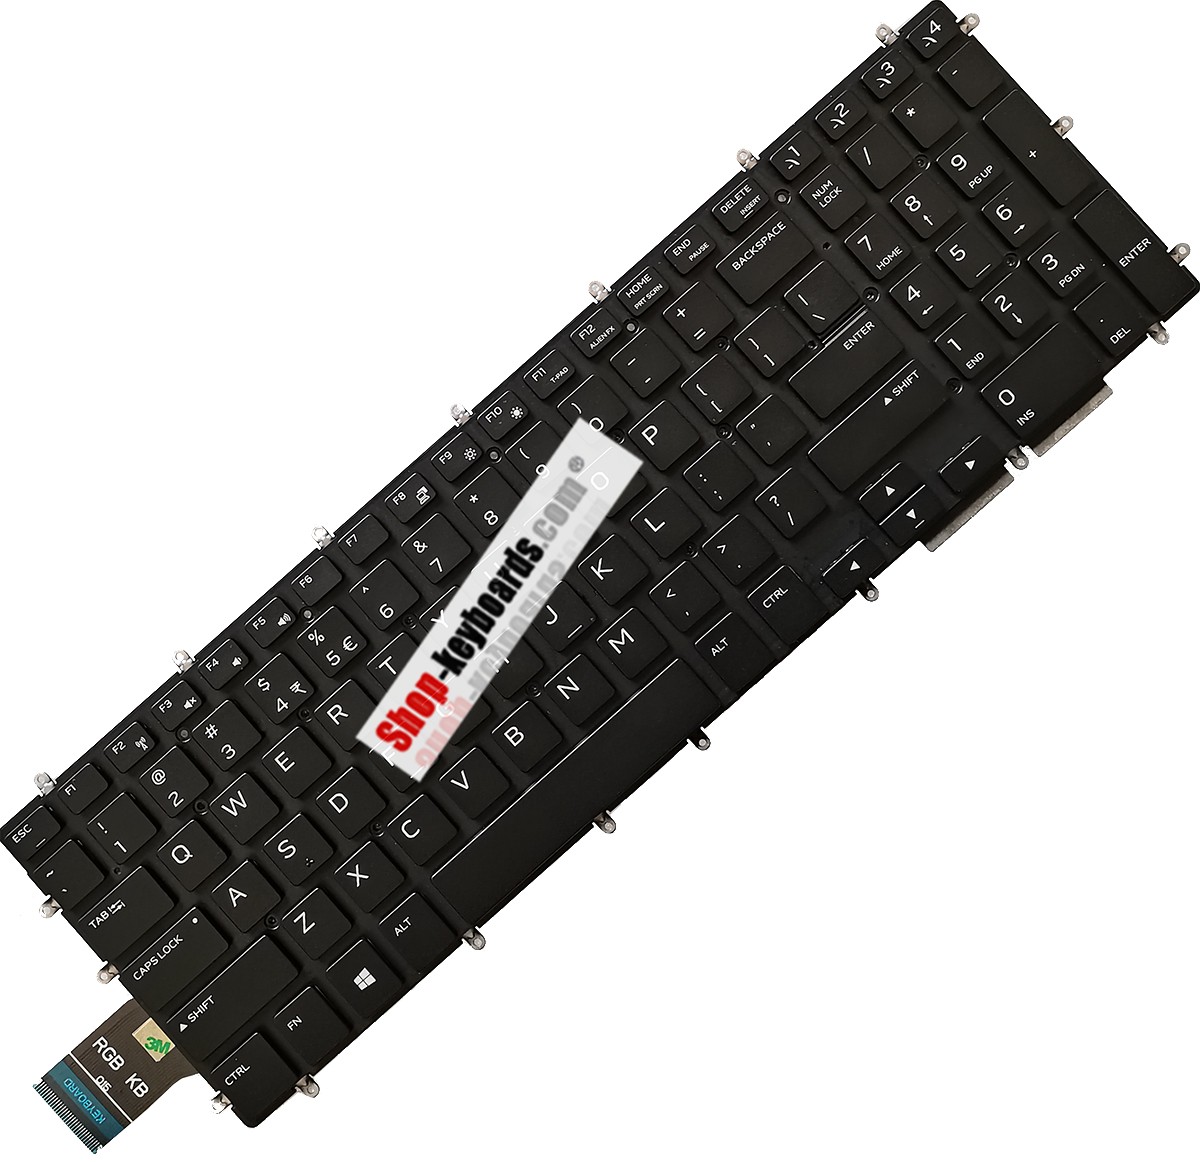 Dell M15-8062 Keyboard replacement